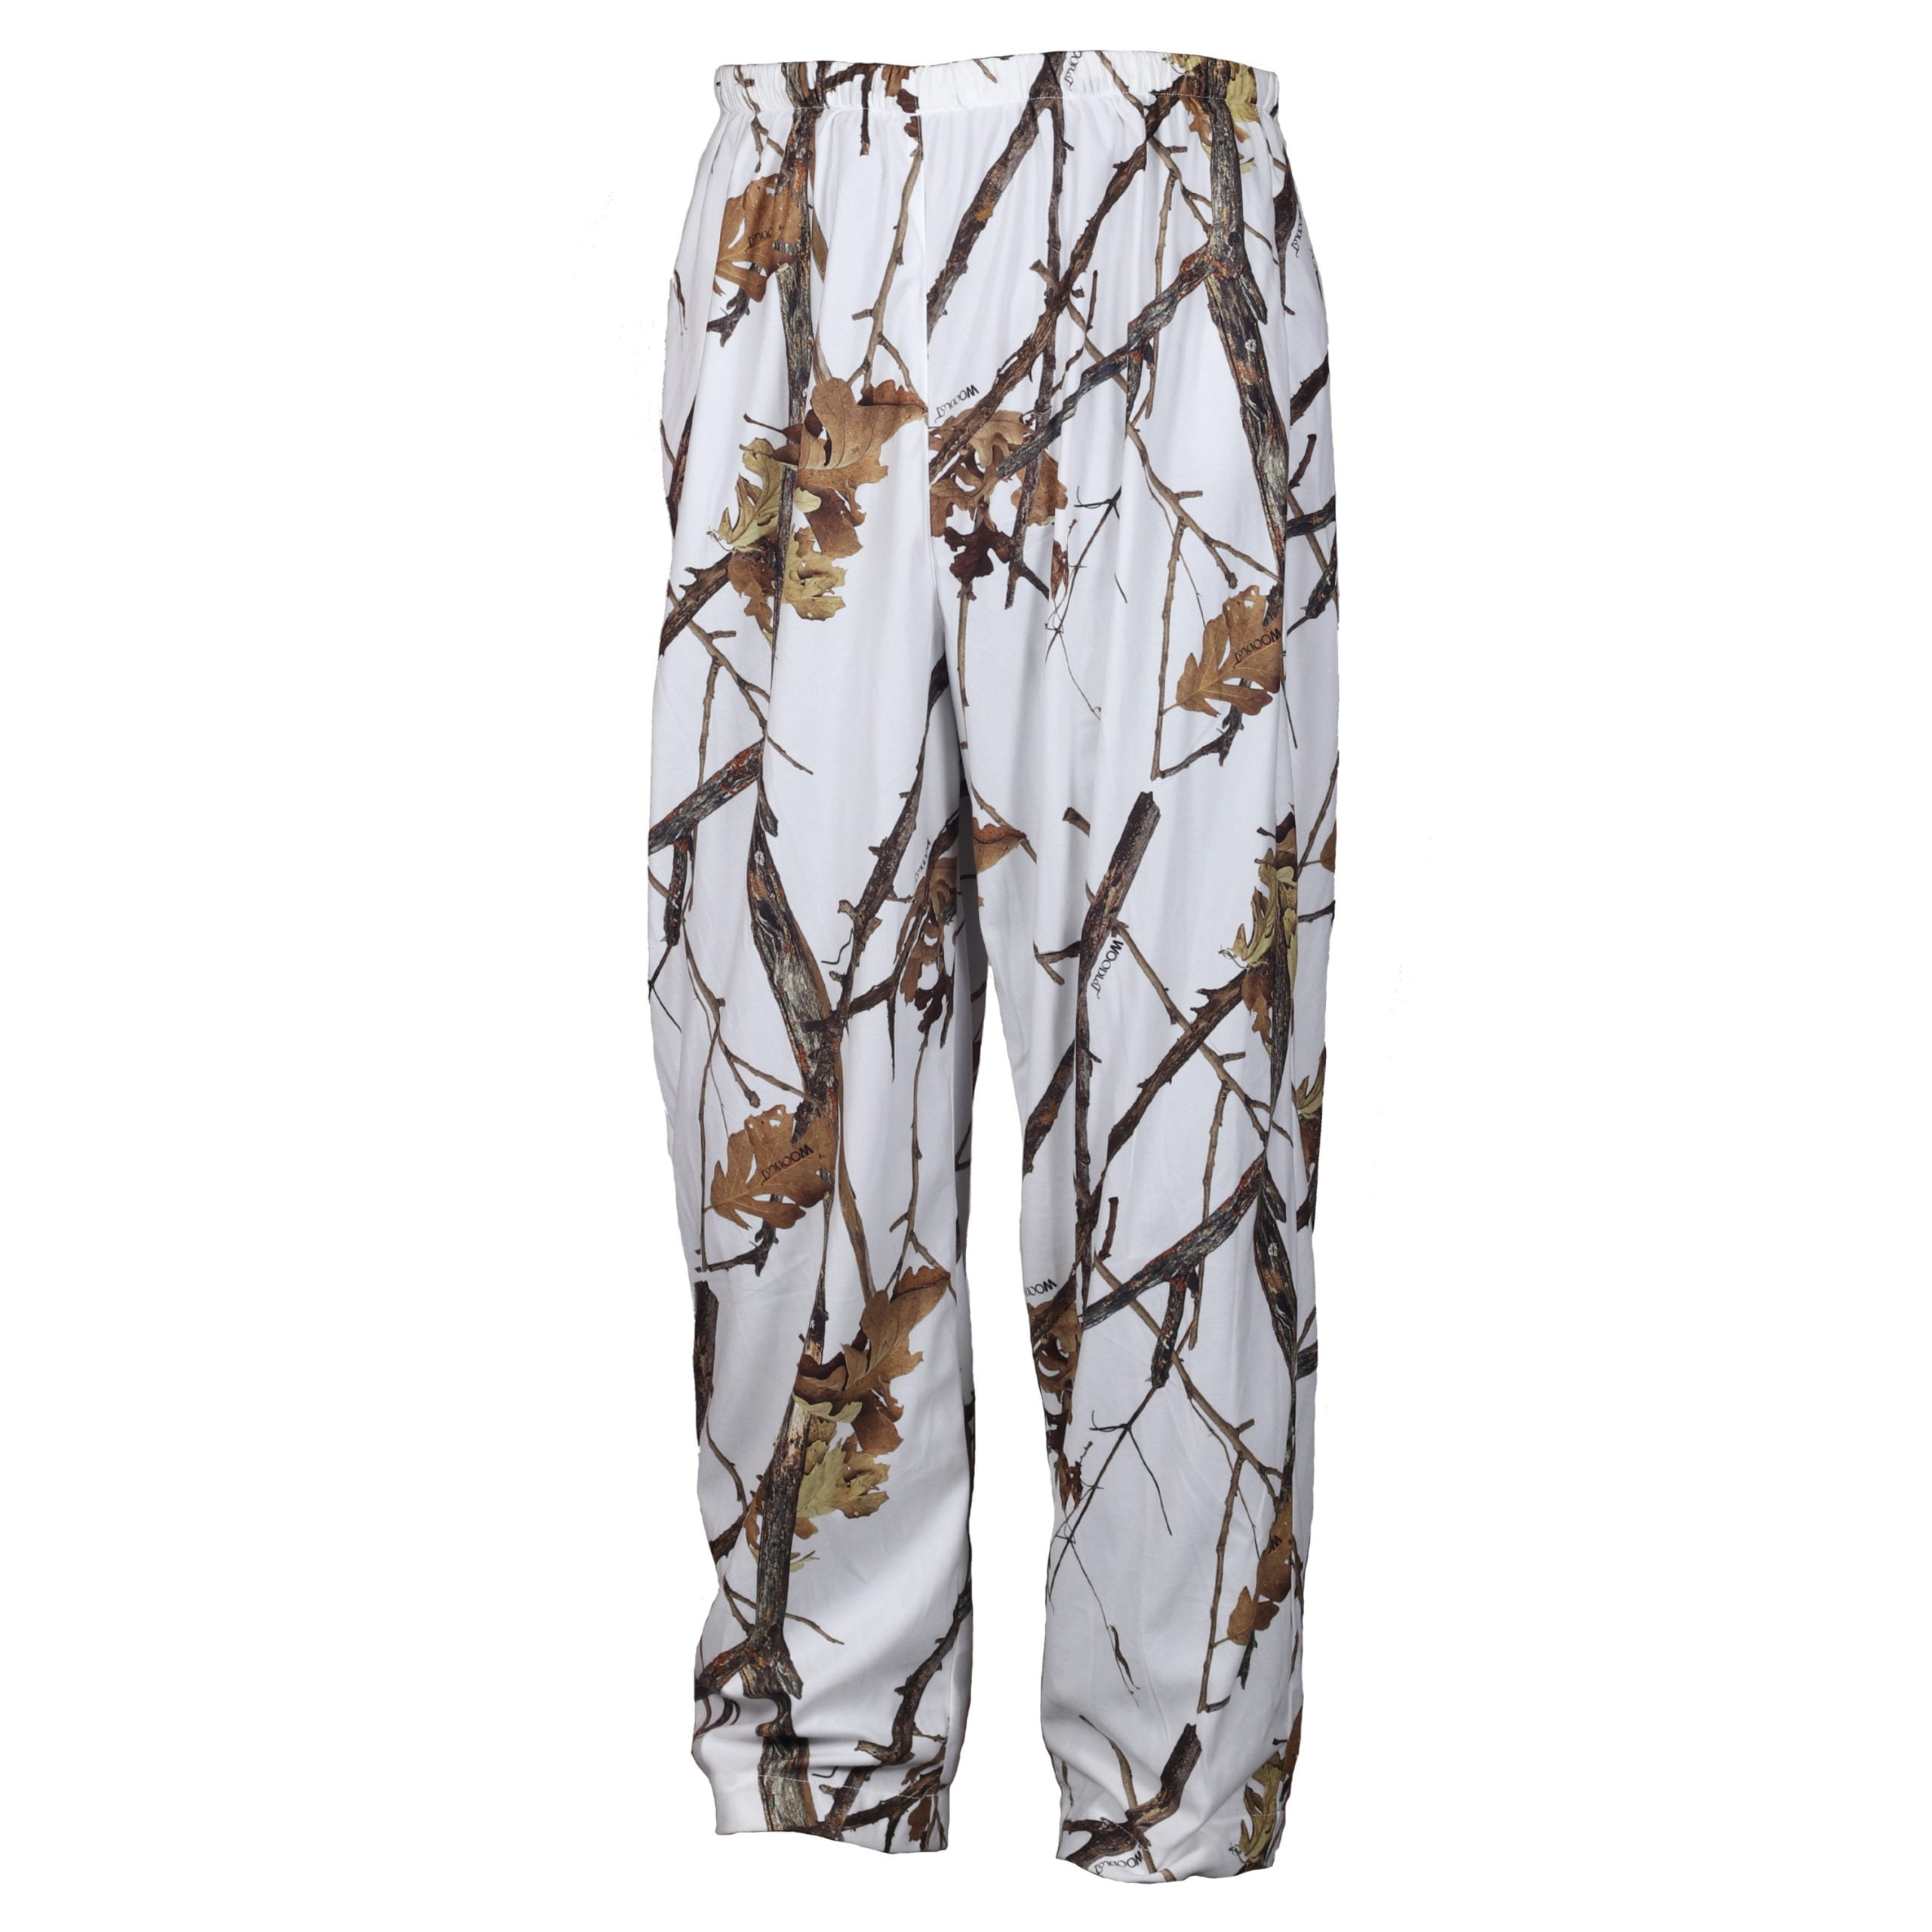 Naked North Snow Camo Lounge Pants Casual Wear Pajamas White Camouflage 